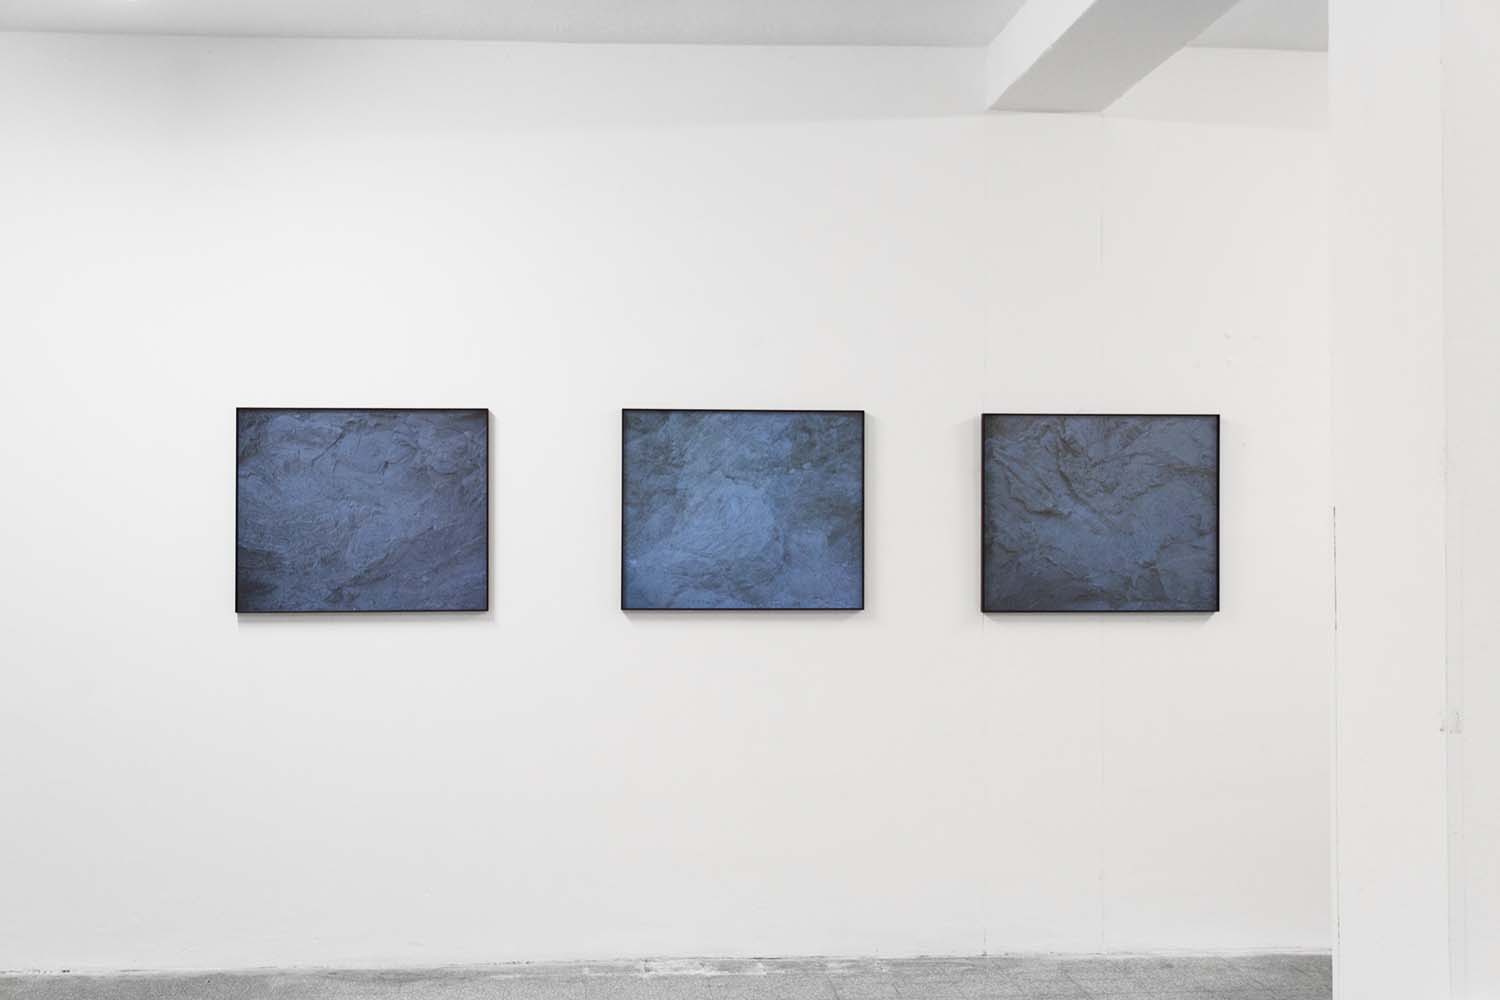 Indacoterra, exhibition view, 2019 Giclée prints, 70x85cm each; cyanotype on raw alabaster - Lidia Bianchi -  courtesy of the artist